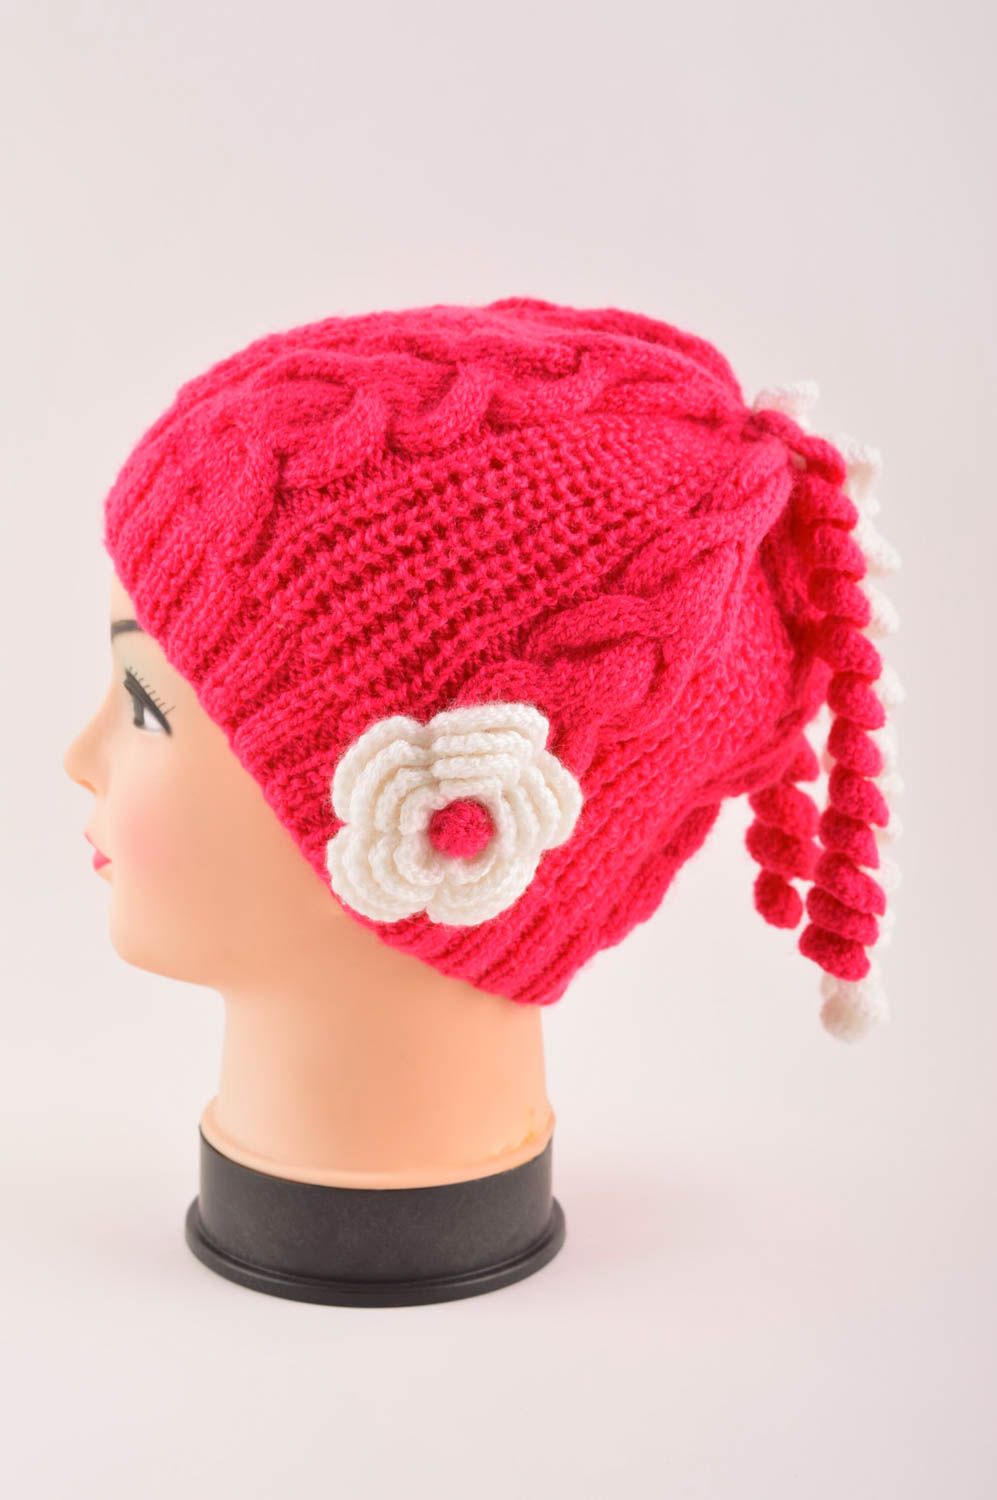 Handmade crocheted hat for babies red hat for girls stylish baby accessories photo 4